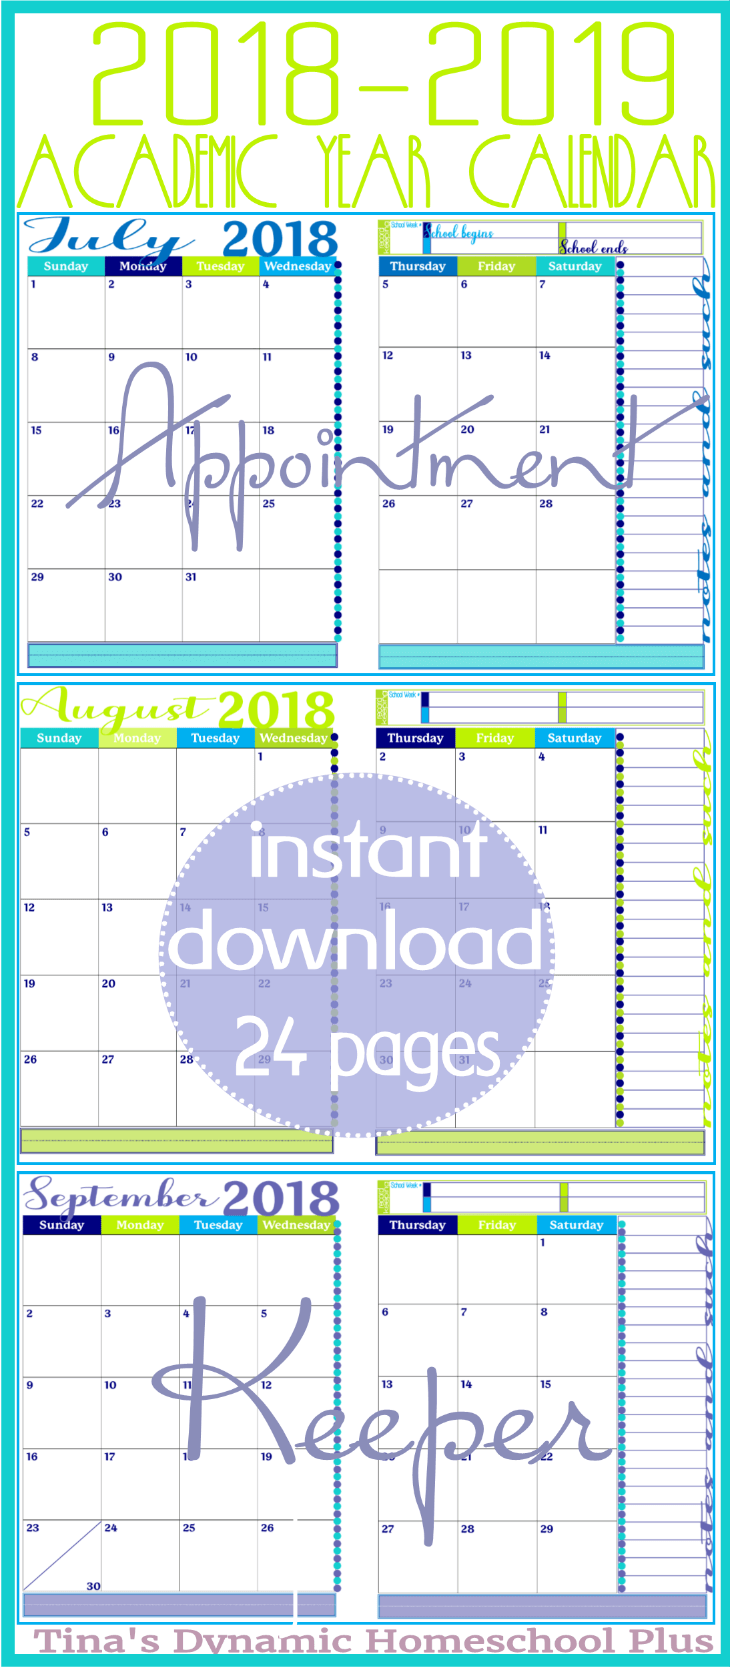 Grab this beautiful and in color 2 page per month academic calendar. You get ALL 12 months. It’s academic because it begins in July when you begin homeschool planning. And it has 12 months if you’re like me and plan year around. You’ll love this Tide Pool color option. Use it to begin building your 7 Step Free Homeschool Planner. Click here to grab it! 